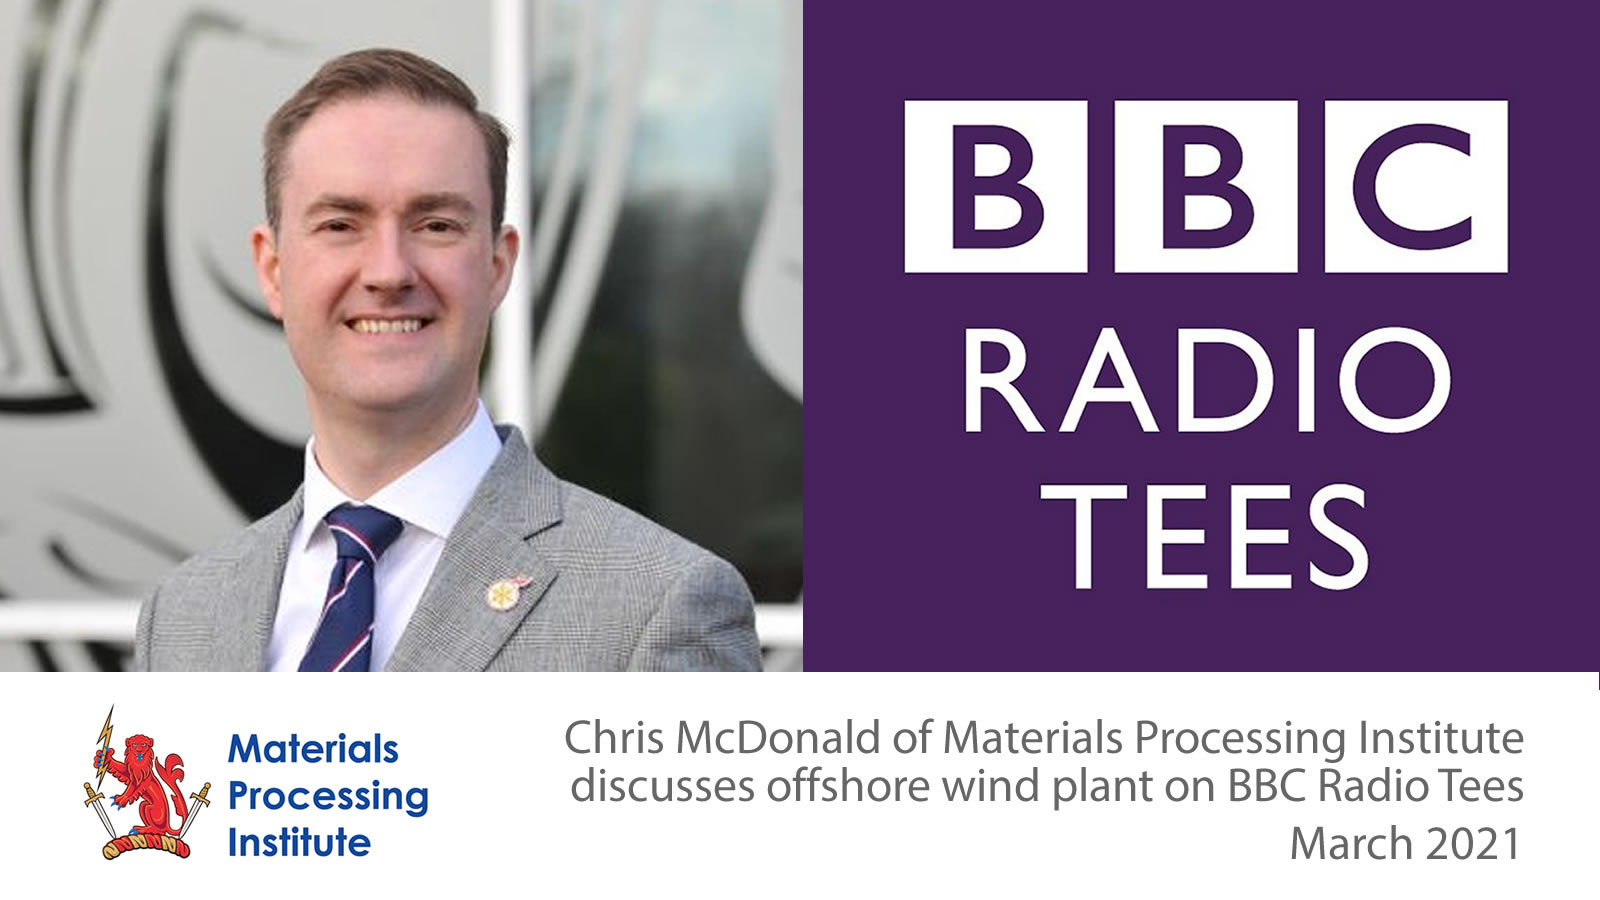 Chris McDonald discusses offshore wind plant on BBC Radio Tees - March 2021